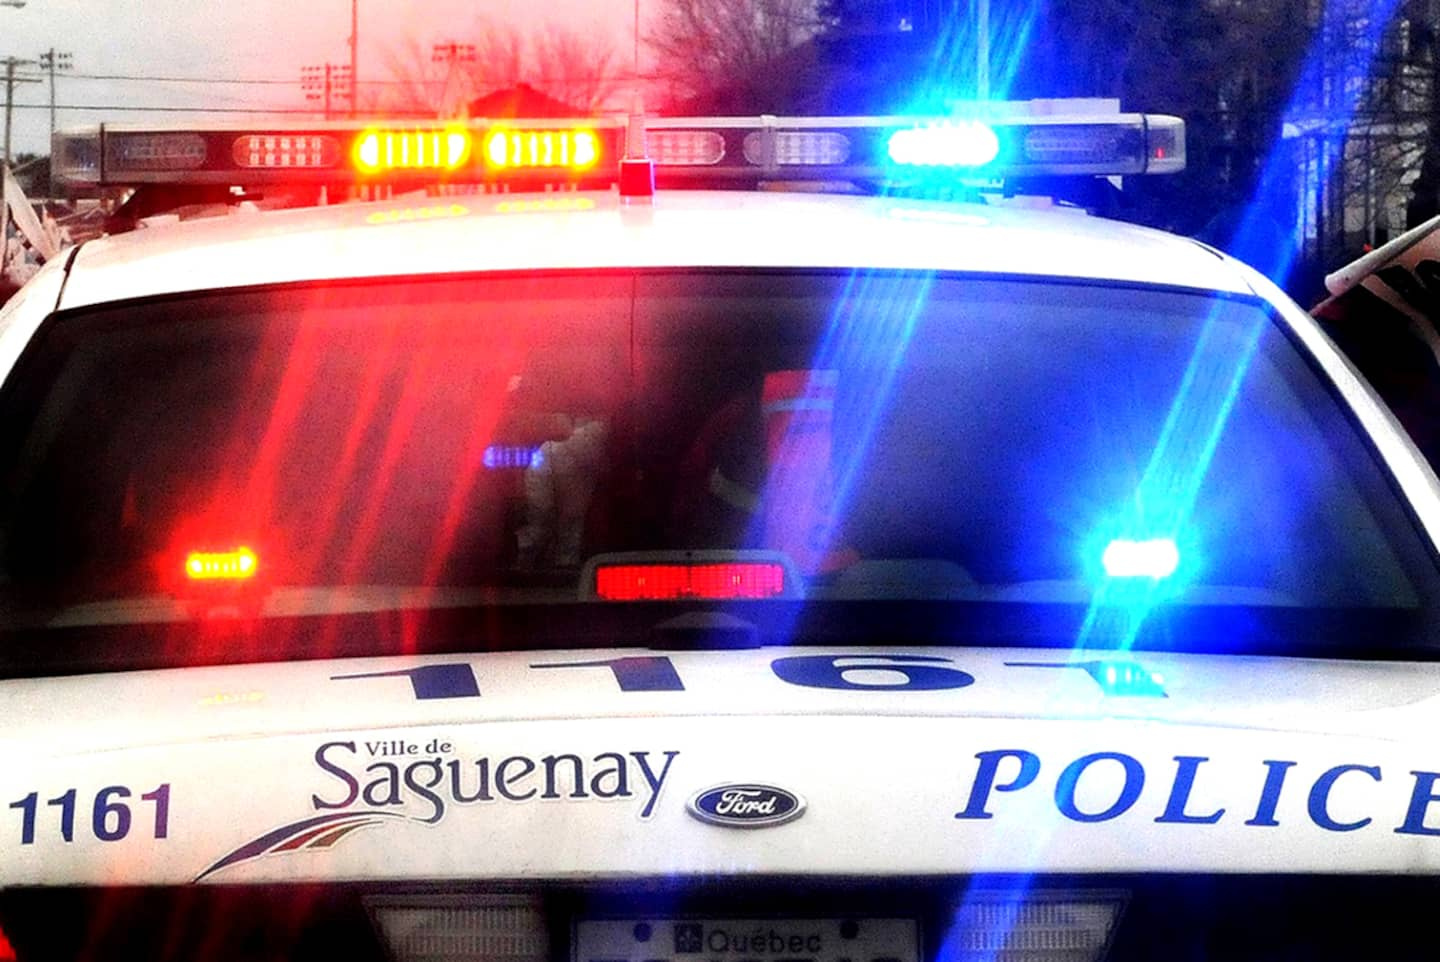 Saguenay: two unskillful suspects are caught red-handed